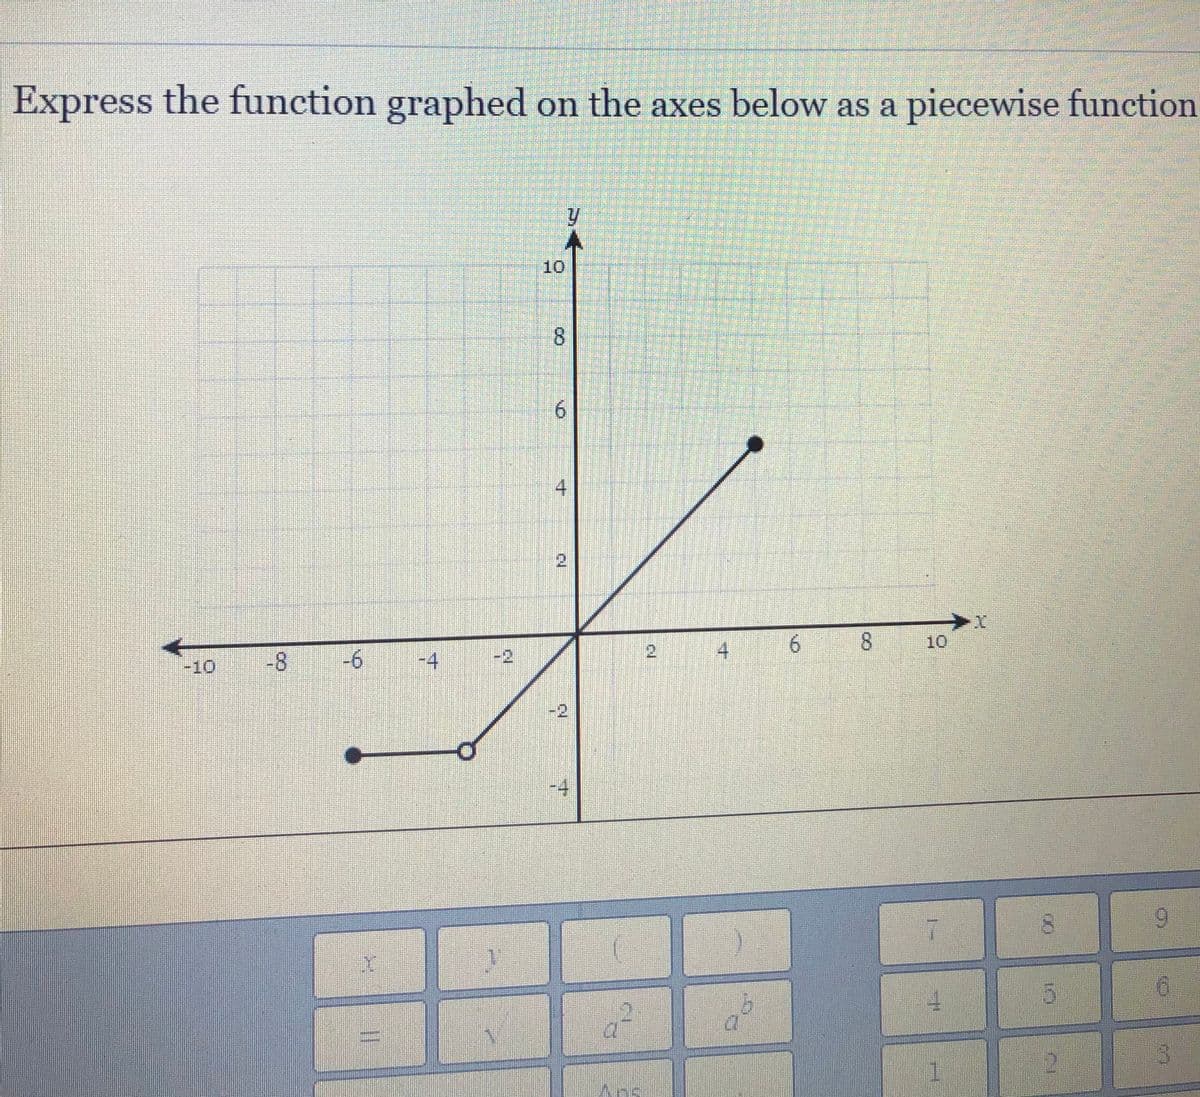 Express the function graphed on the axes below as a piecewise function
10
8.
6.
4
2)
2.
4
6.
10
8.
-6
-4
-2
-10
:2
-4
9.
8.
寸
